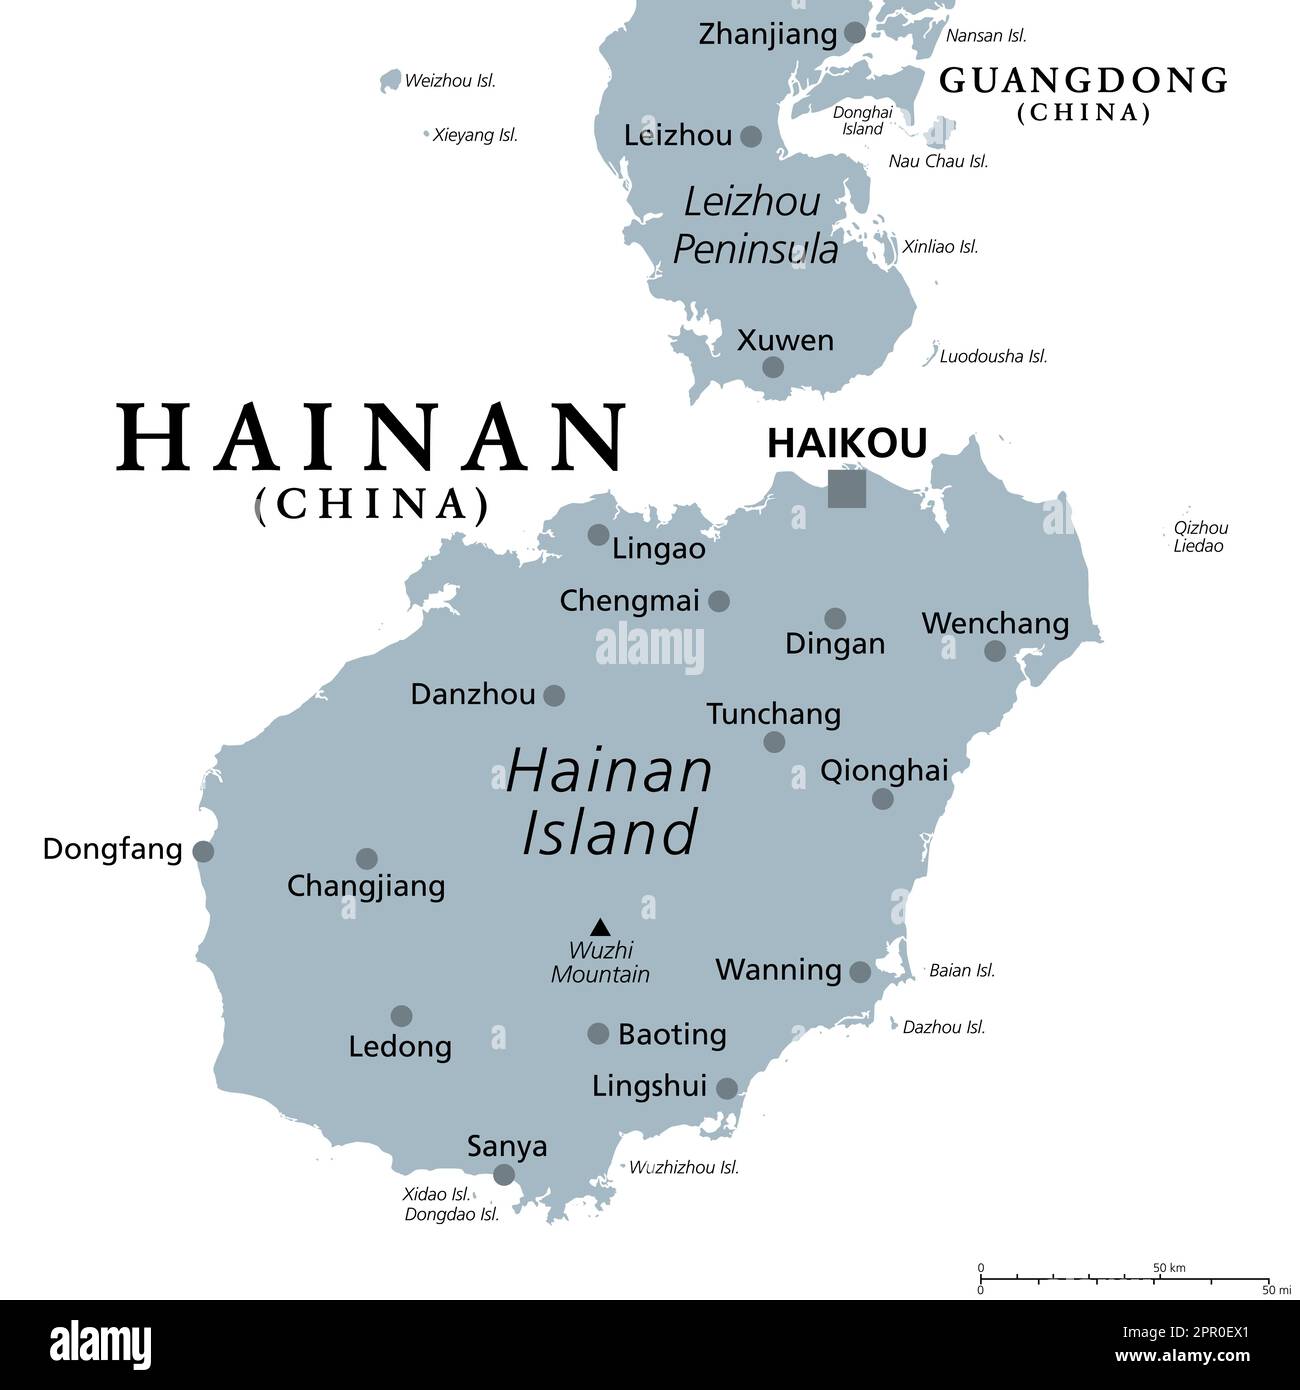 Hainan, the smallest and southernmost province of China, PRC, gray political map. Hainan Island with capital Haikou, and various smaller islands. Stock Photo